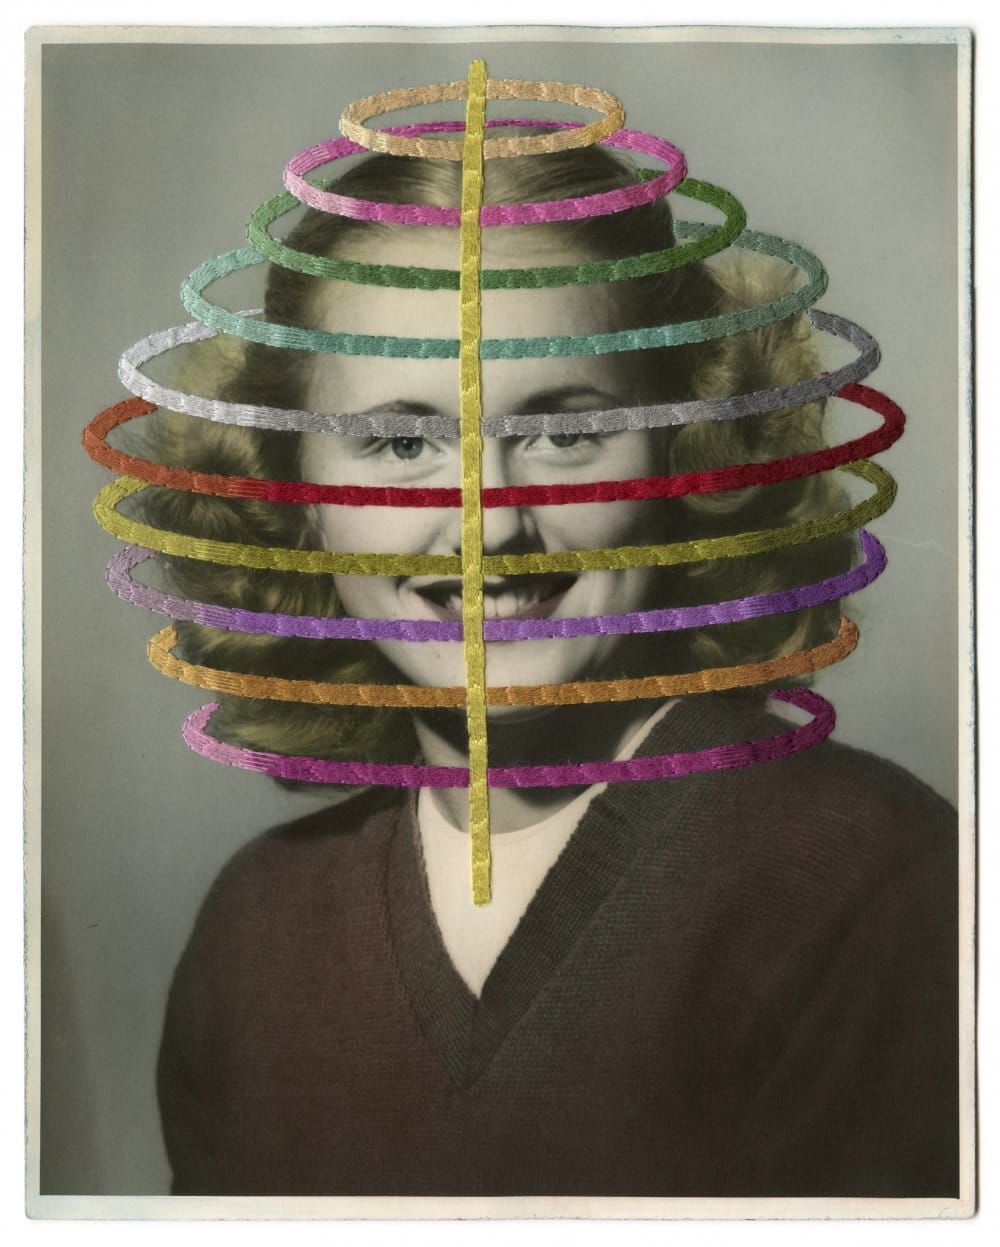 Julie Cockburn Combines Vintage Photos With Embroidery To Create Mesmerizing Semi Abstract Artworks (6)